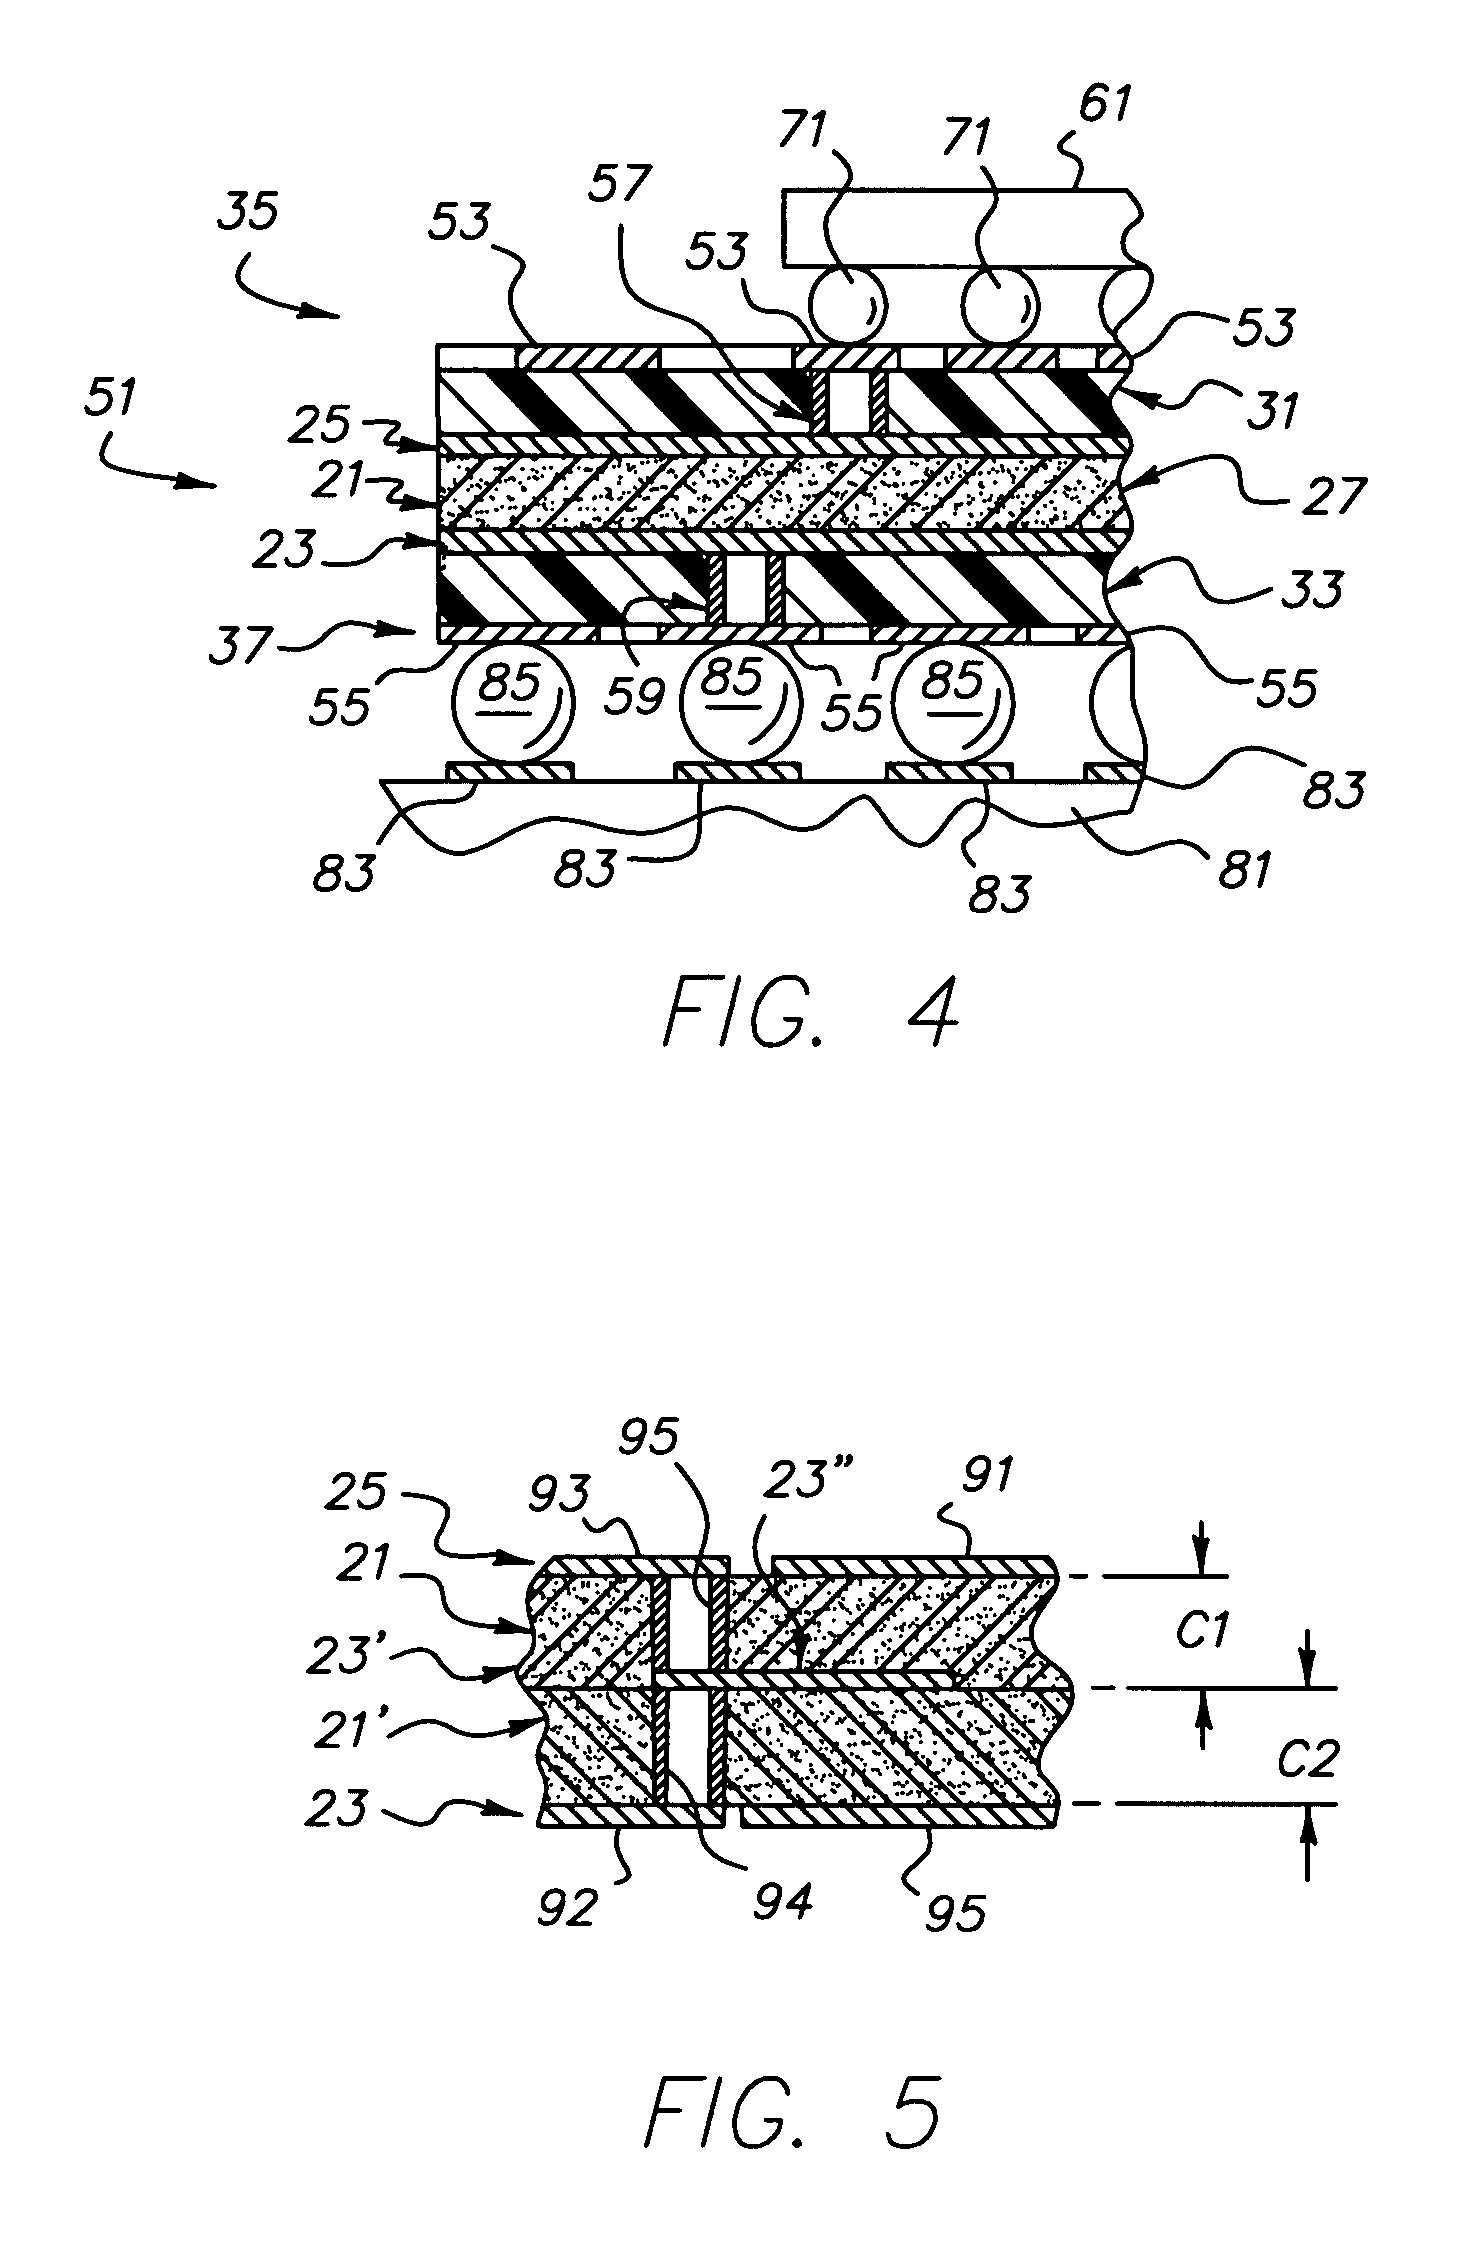 Non-flaking capacitor material, capacitive substrate having an internal capacitor therein including said non-flaking capacitor material, and method of making a capacitor member for use in a capacitive substrate